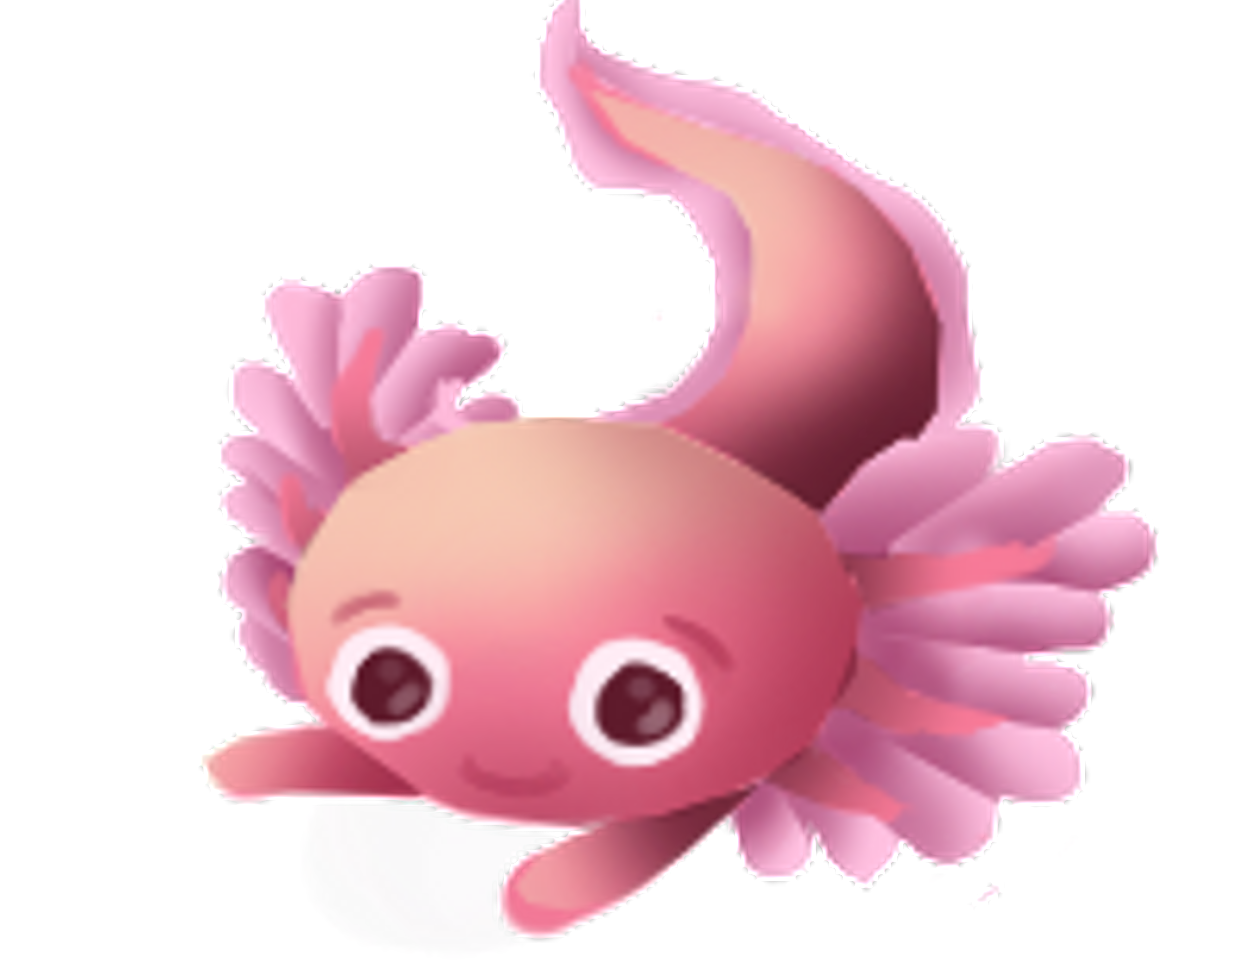 The main mascot of our project: Axel the Axolotl